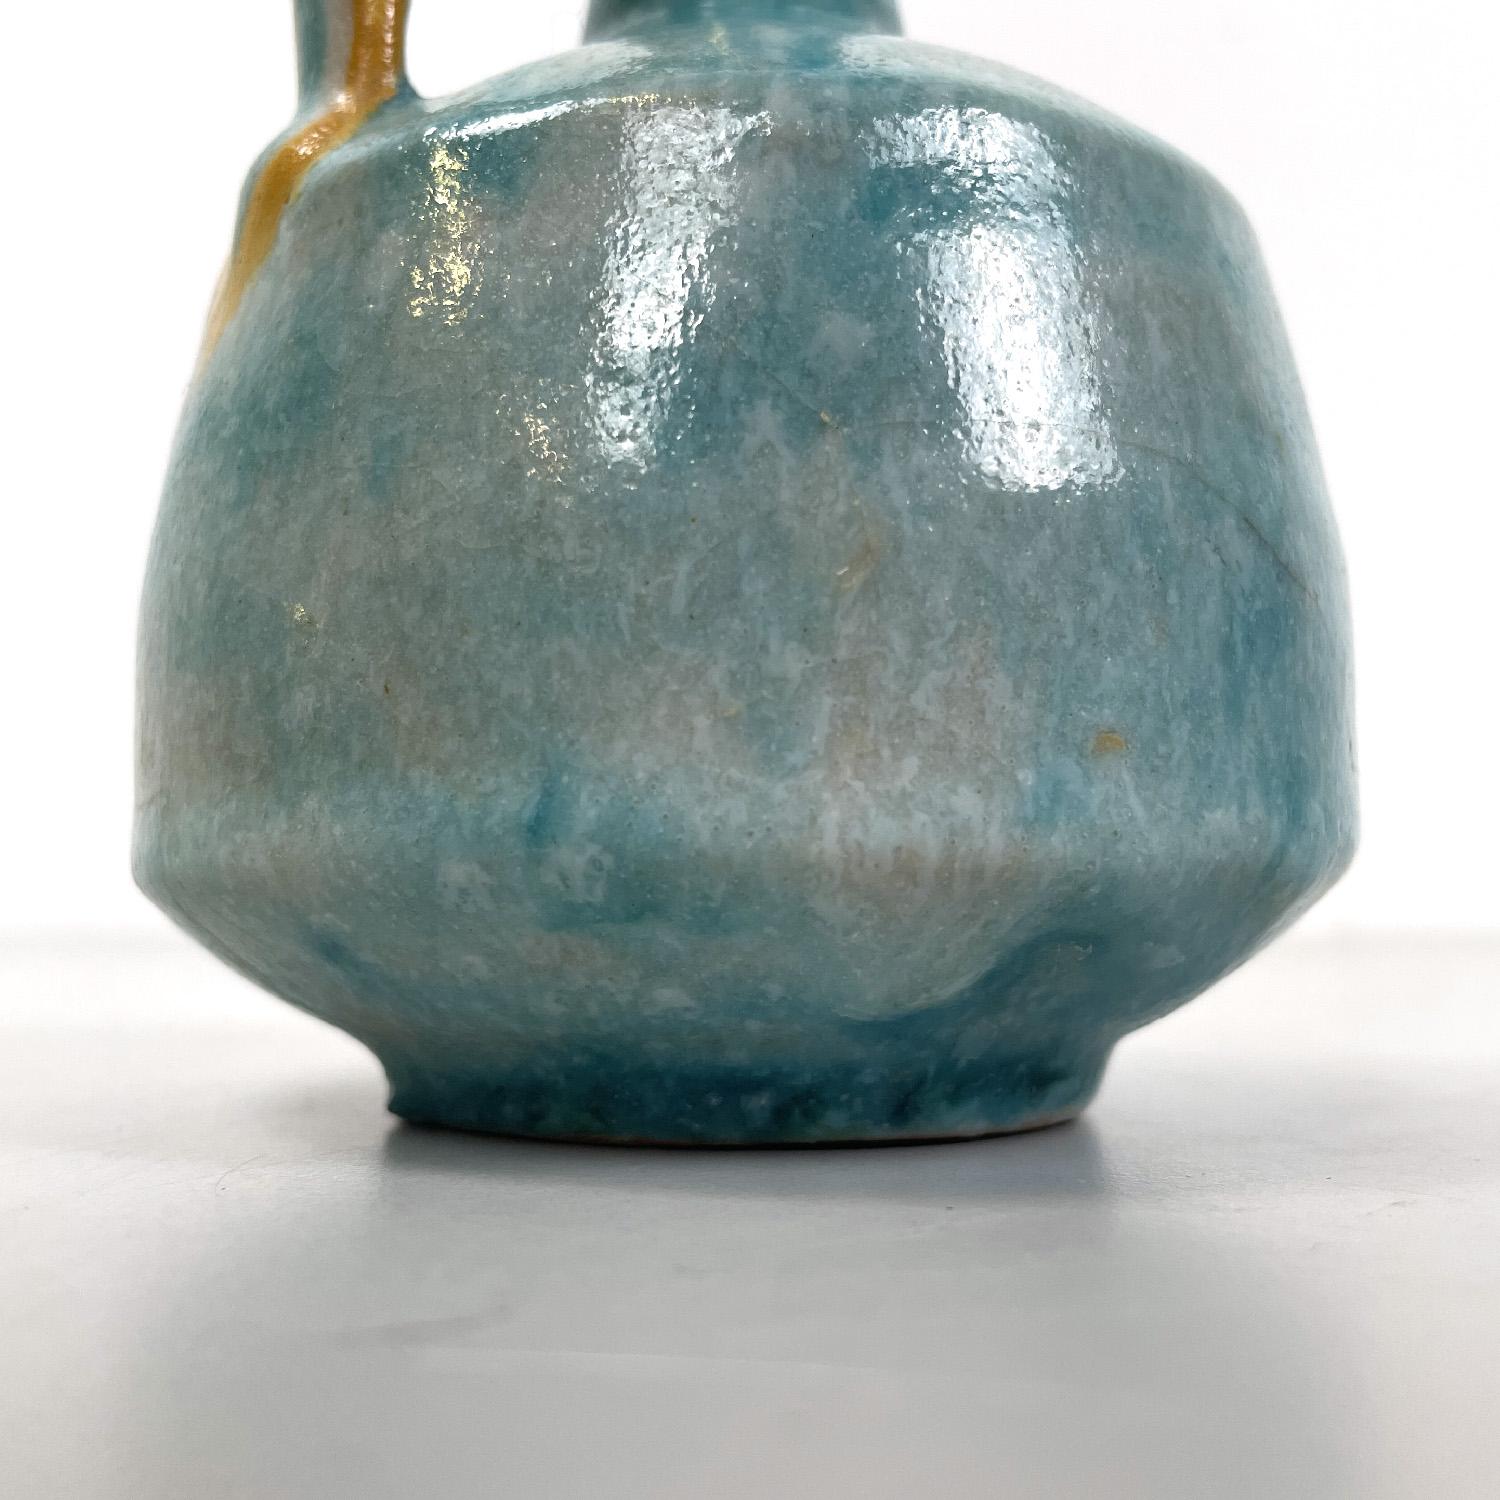 Italian modern light blue and yellow ceramic vase by Bruno Gambone, 1970s For Sale 5